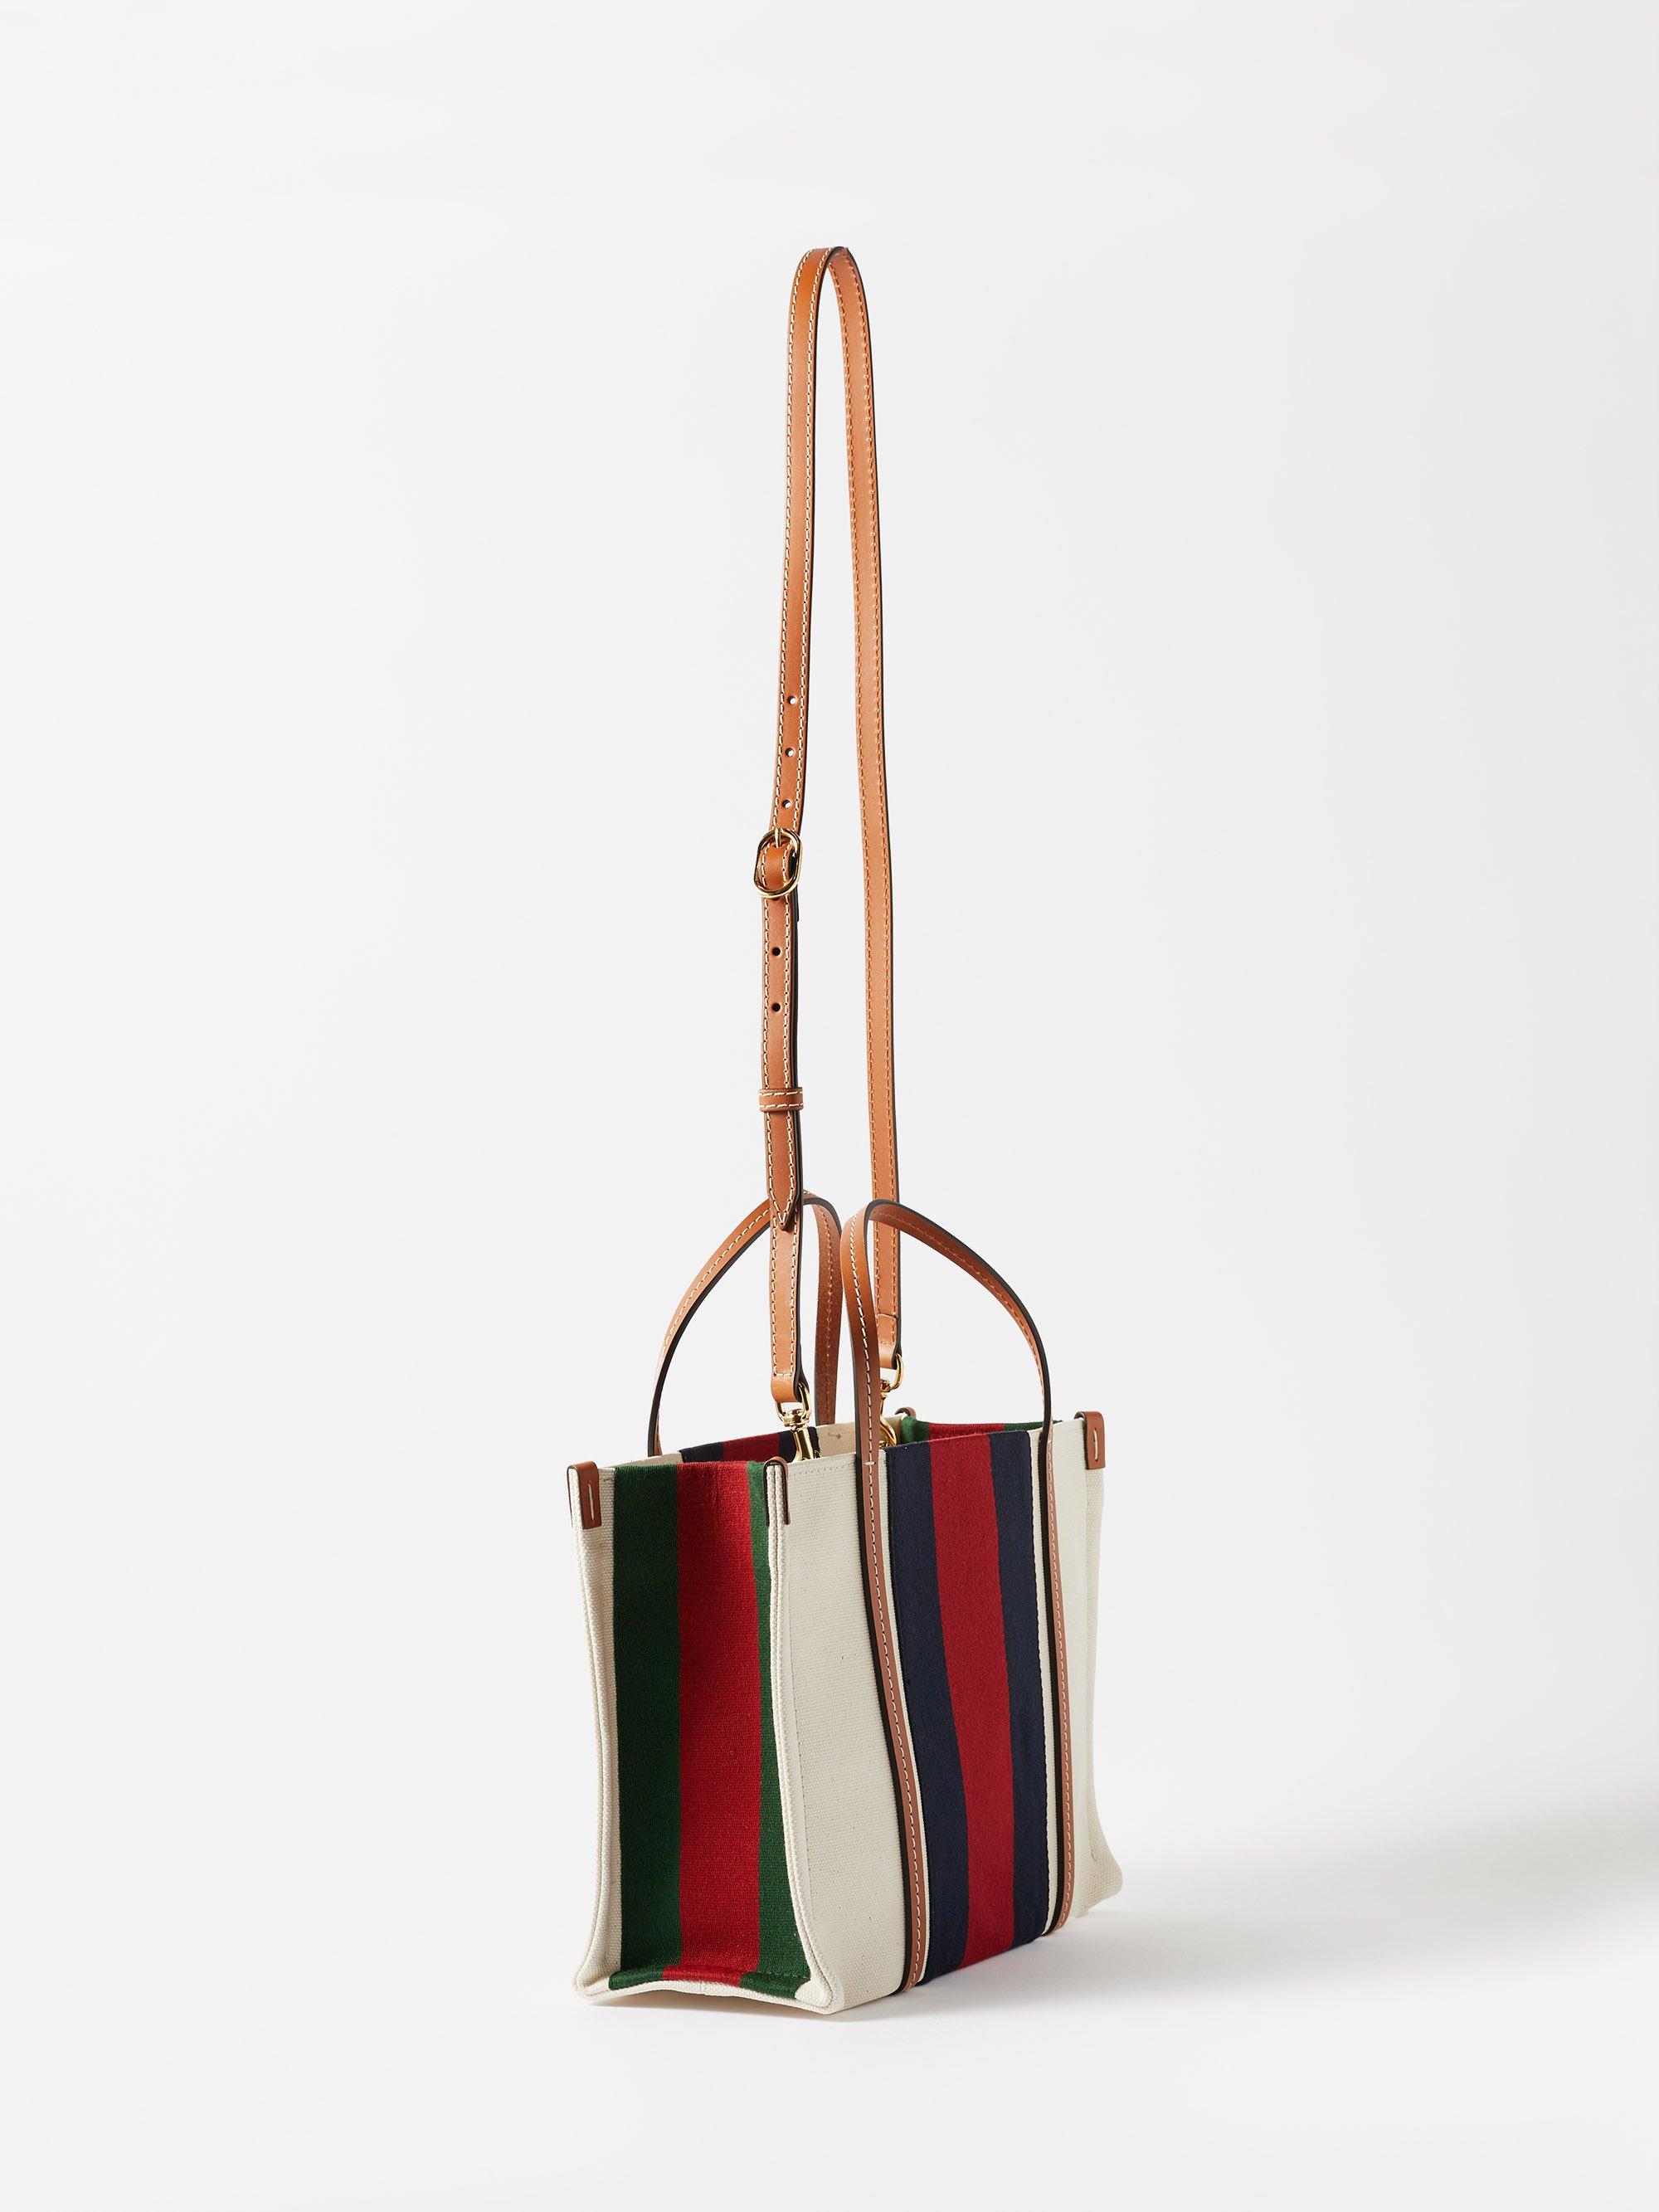 Gucci Logo Striped Leather Canvas Tote Bag Red White Blue